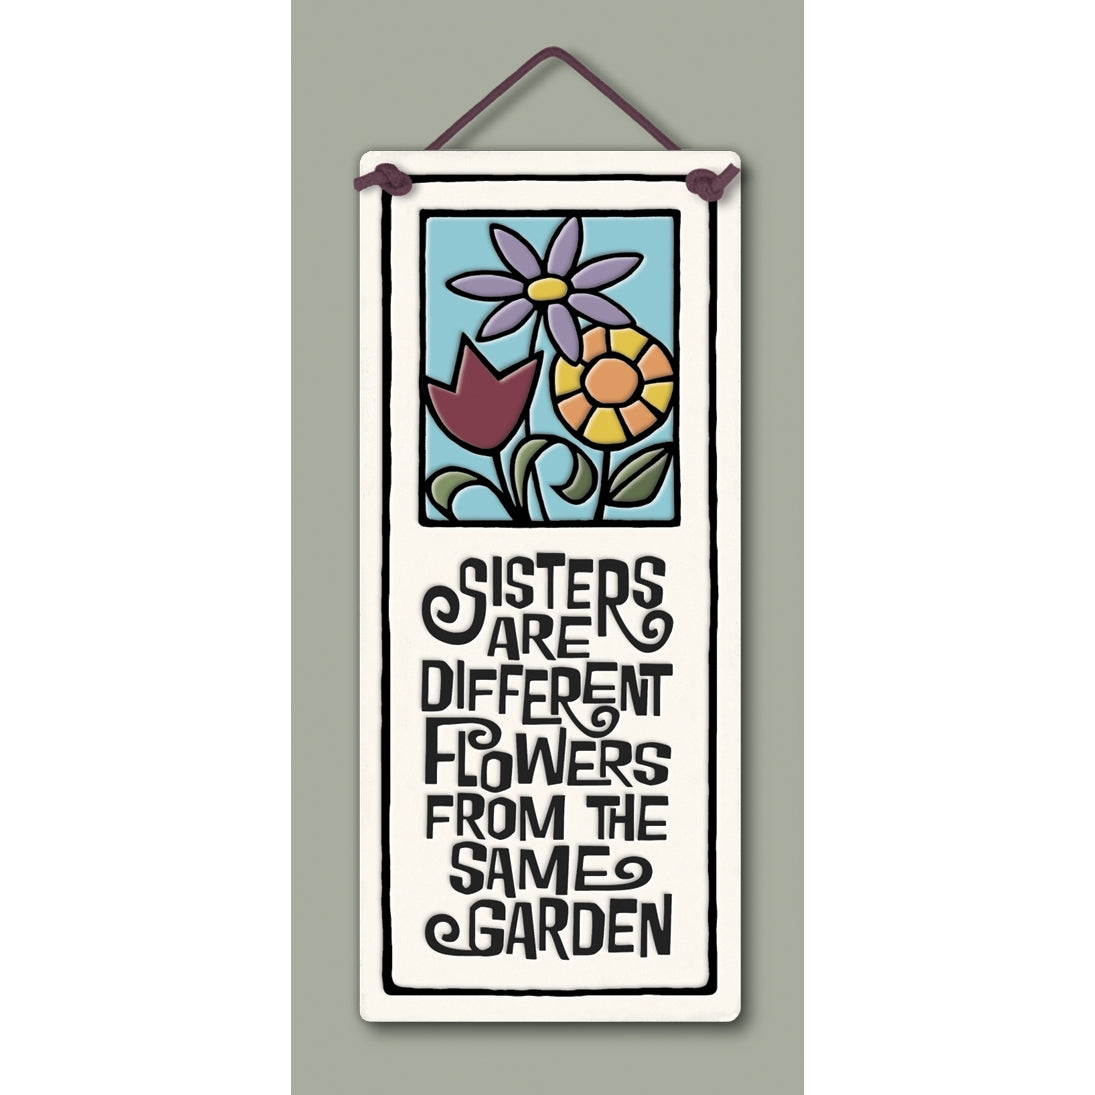 "Sisters are different flowers from the same garden" Stoneware Plaque